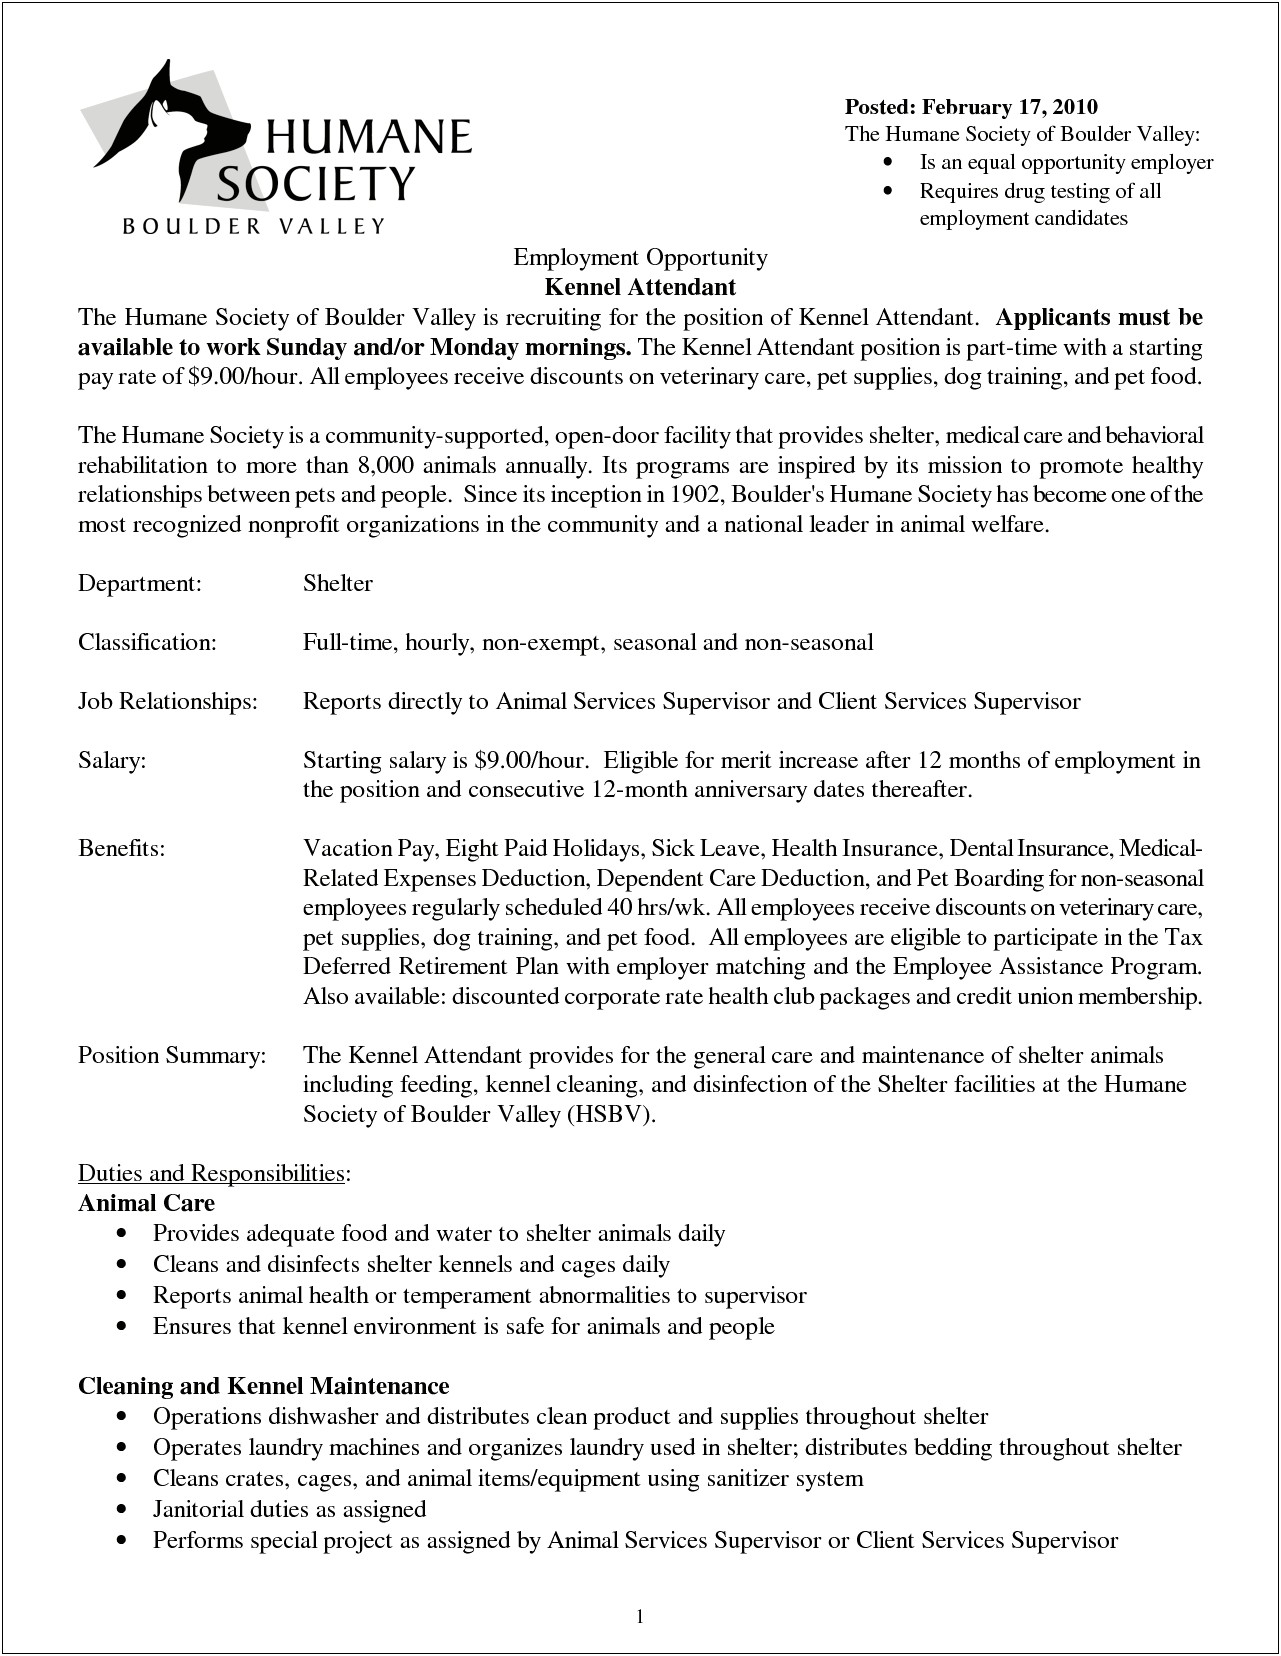 Dietary Aide Resume And Cover Letter